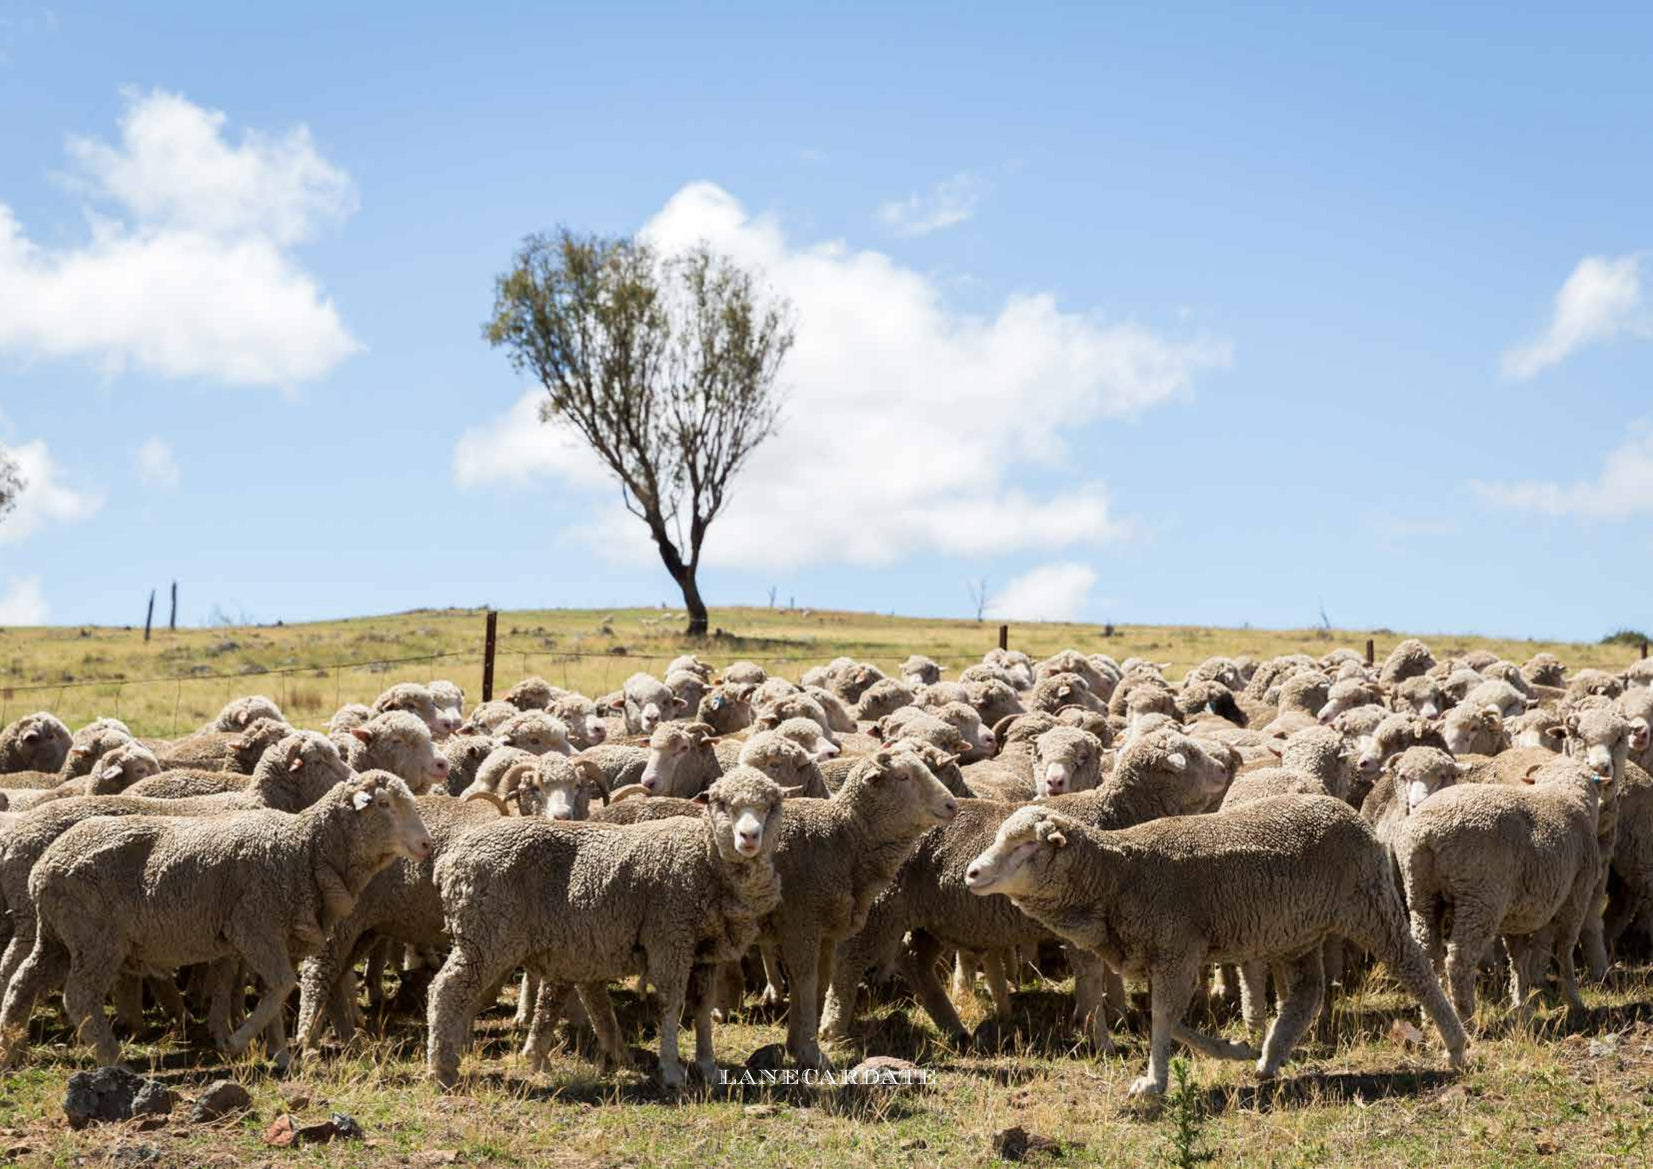 a field of sheep with a tree in the background and a blue sky with a few clouds